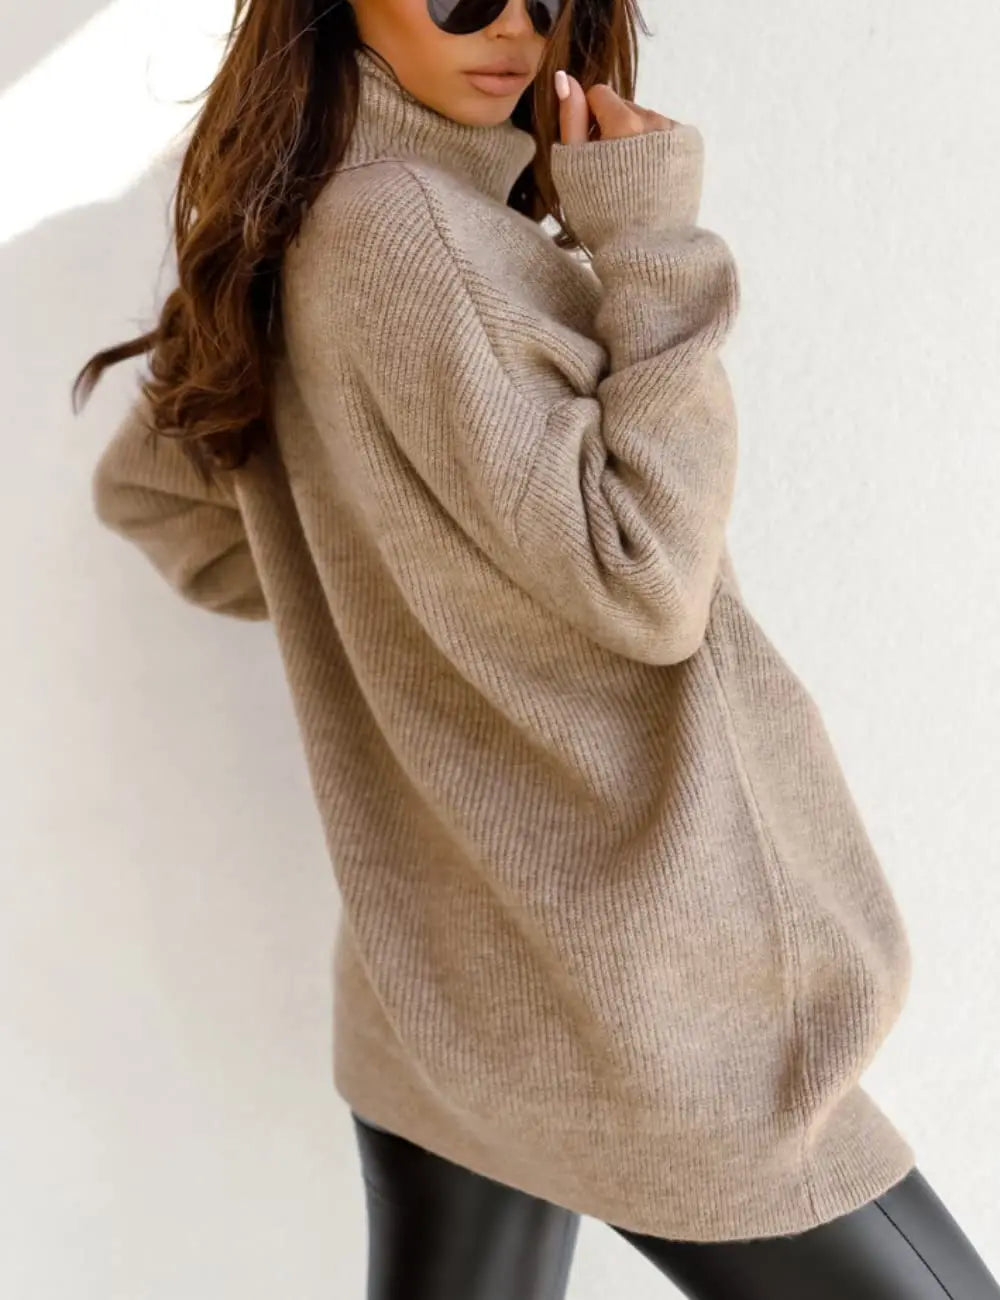 HOT Womens Turtleneck Oversized Sweater Batwing Chunky Pullover Sweater Casual Fall Knit Jumper Tunic Top